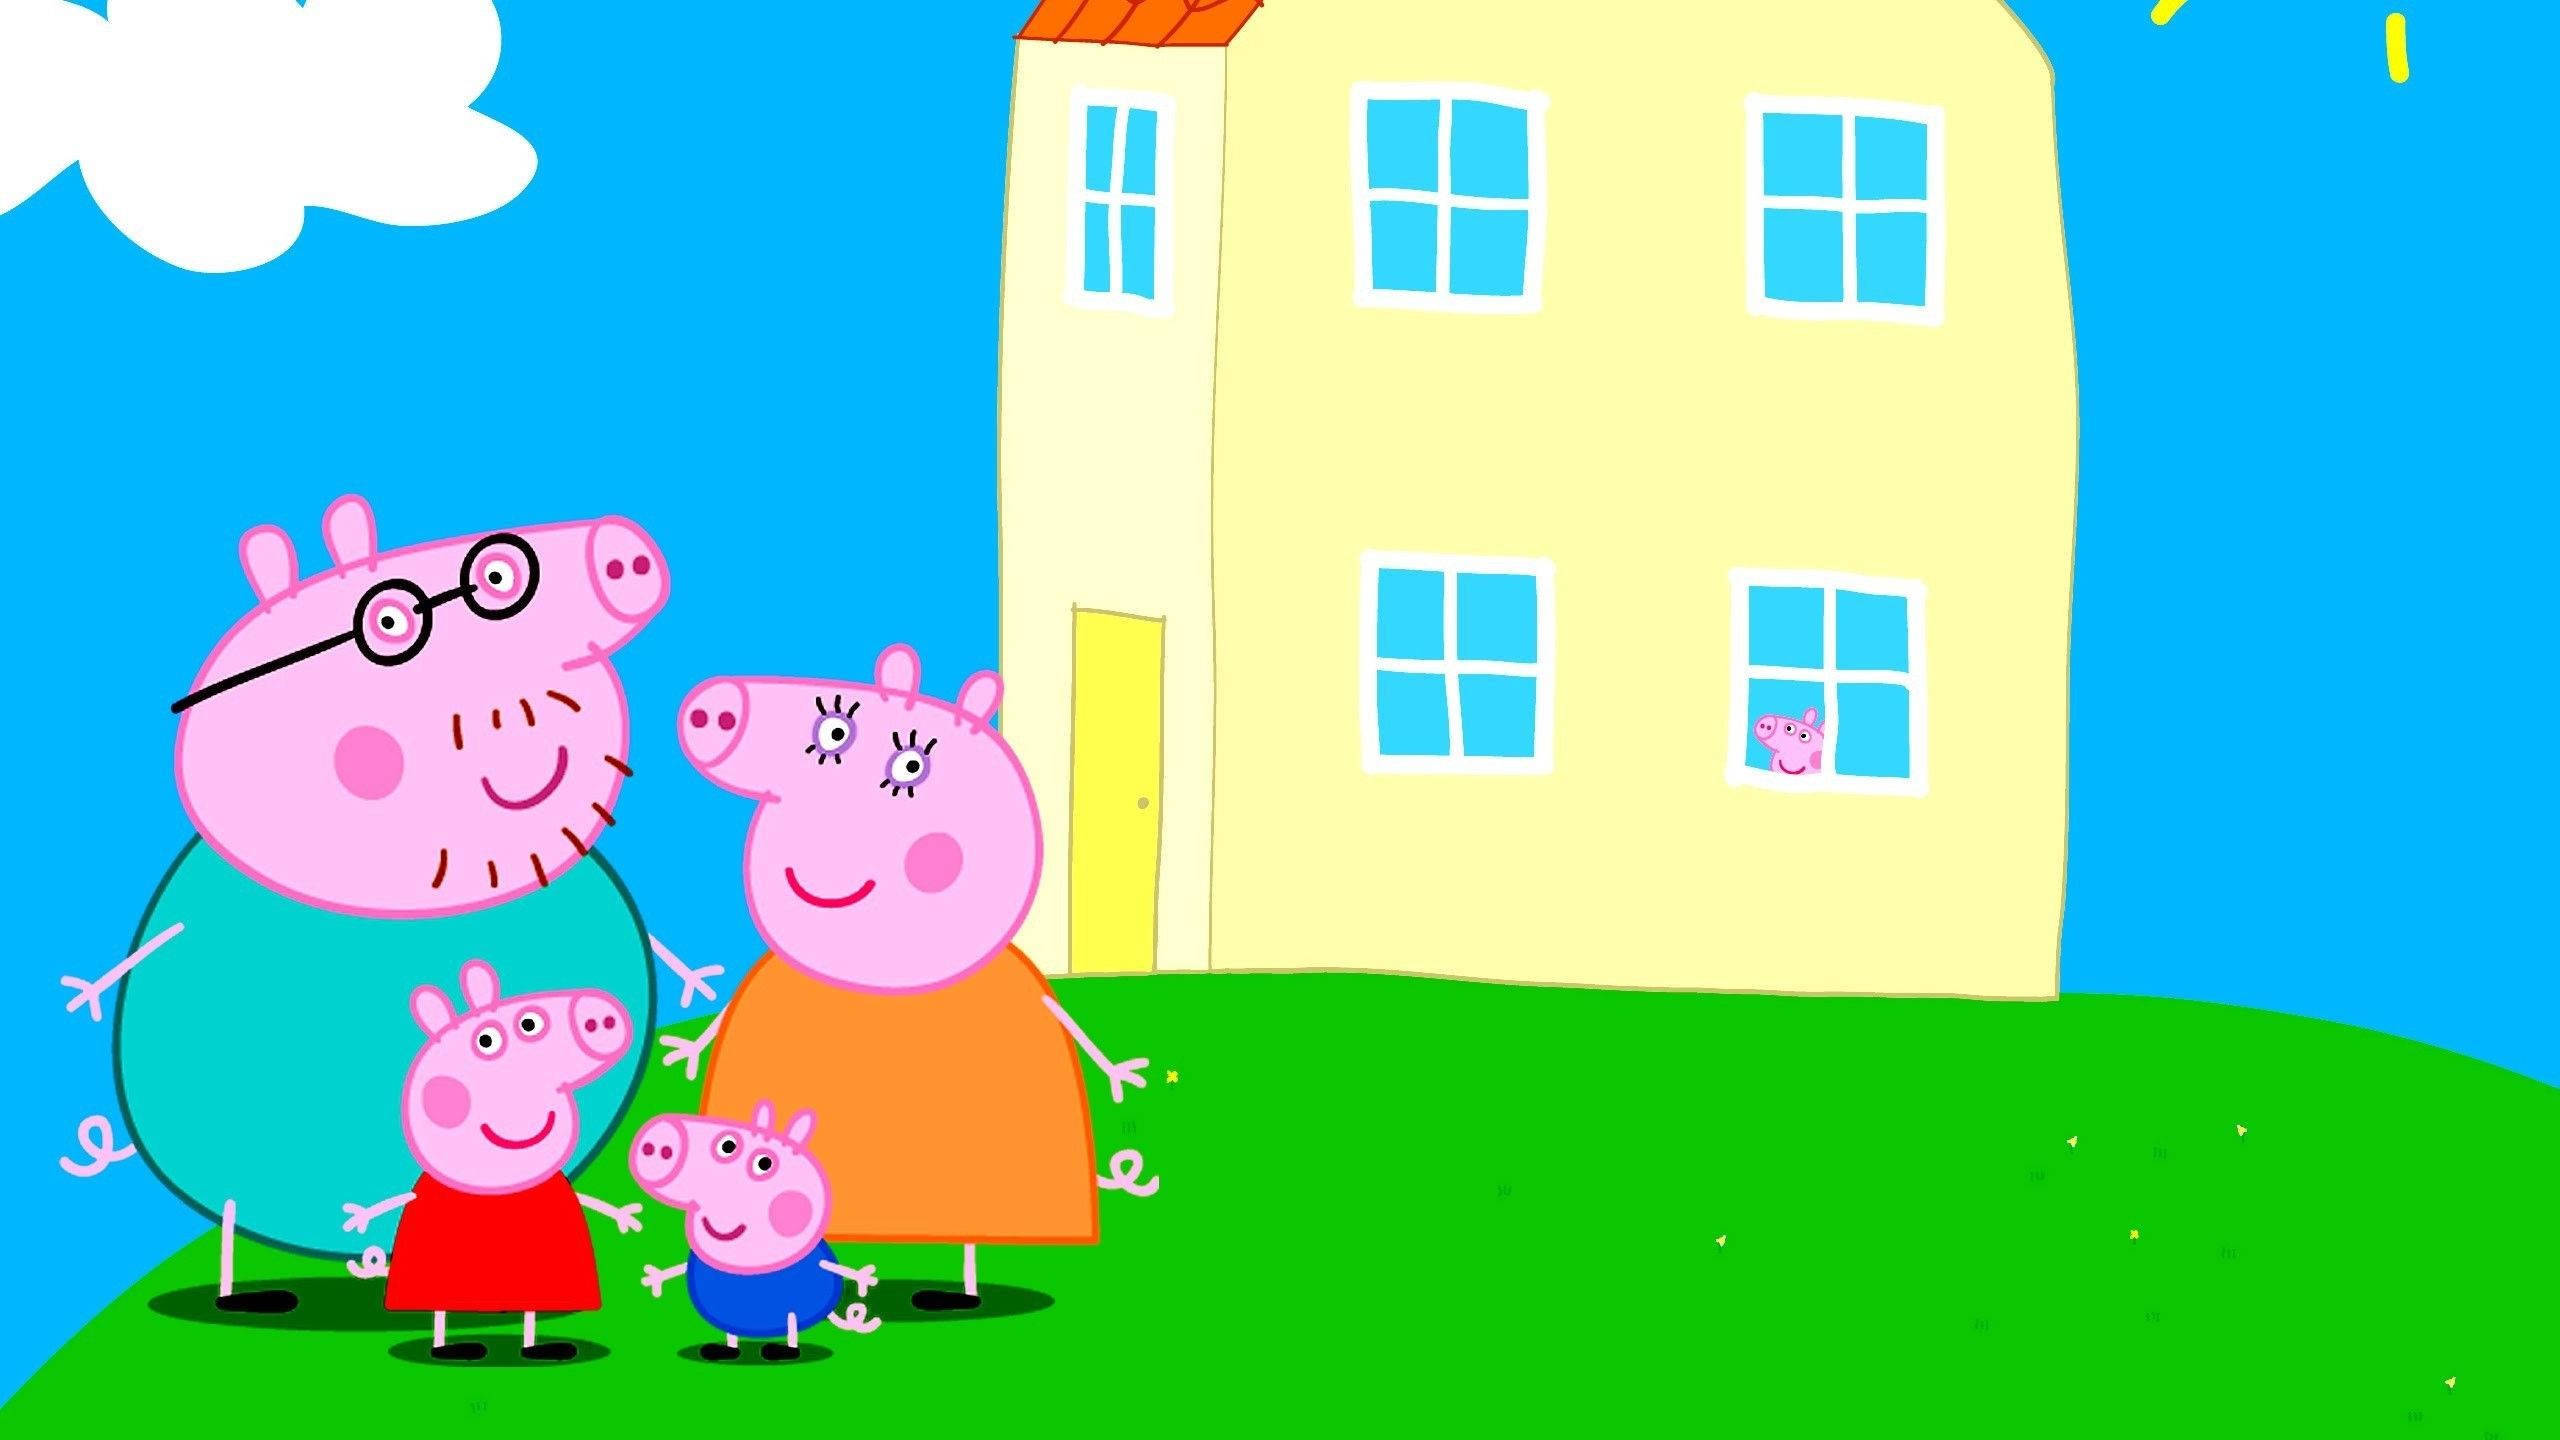 Peppa Pig Family Wallpapers